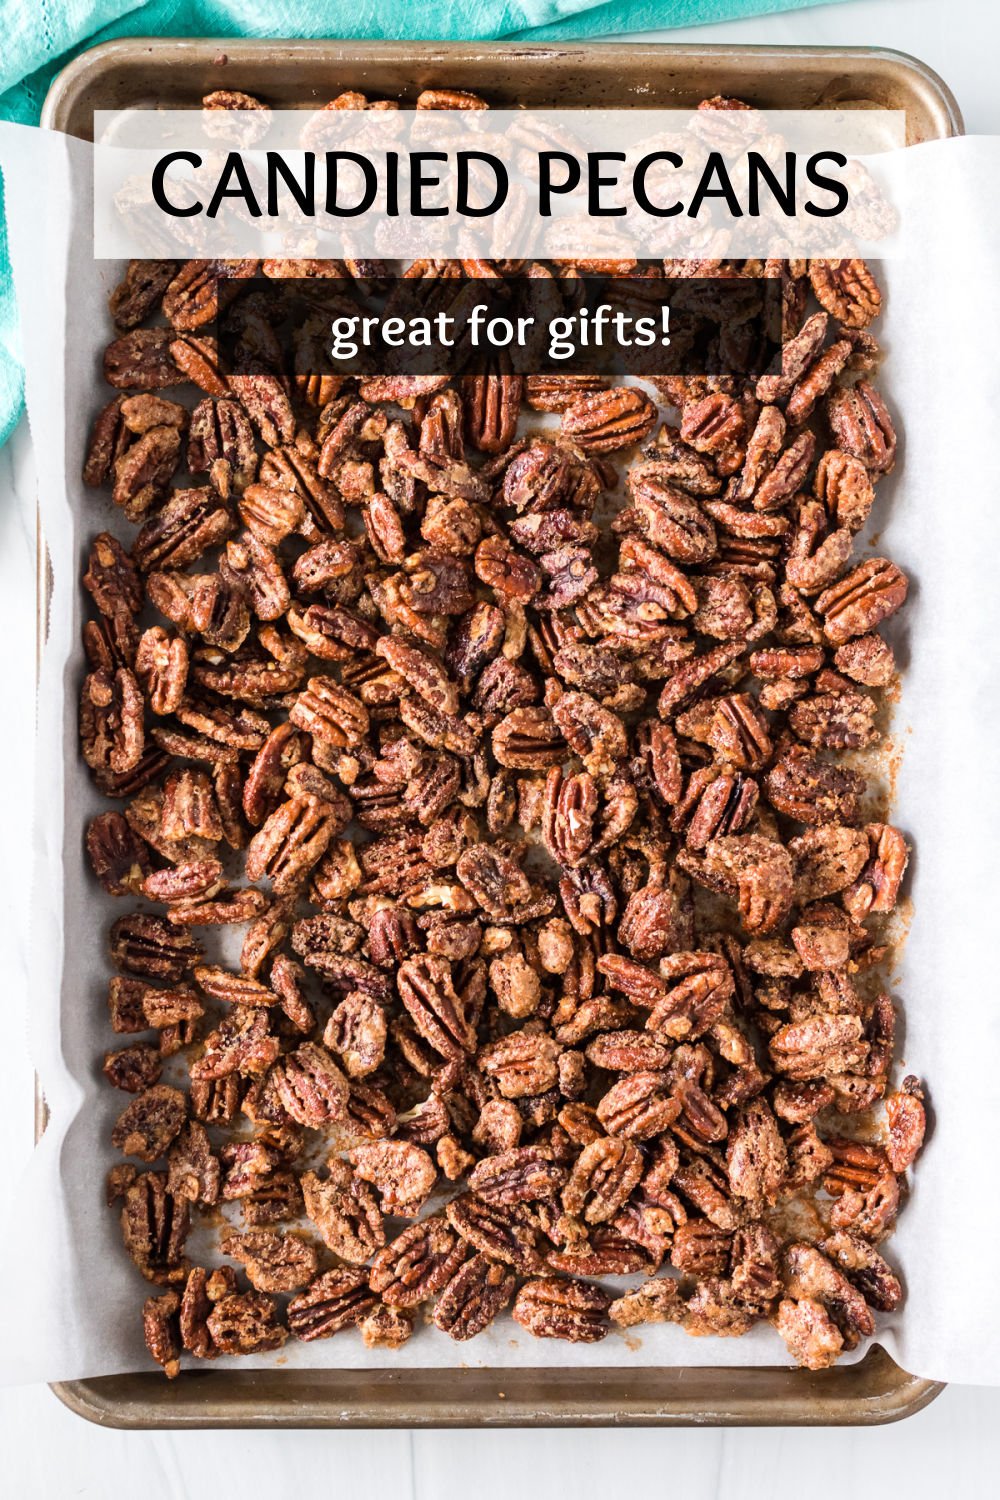 This easy candied pecans recipe is the perfect blend of salty and sweet. These crunchy pecans are great for snacking on, gifting, sprinkling on salads, or topping ice cream. | www.persnicketyplates.com